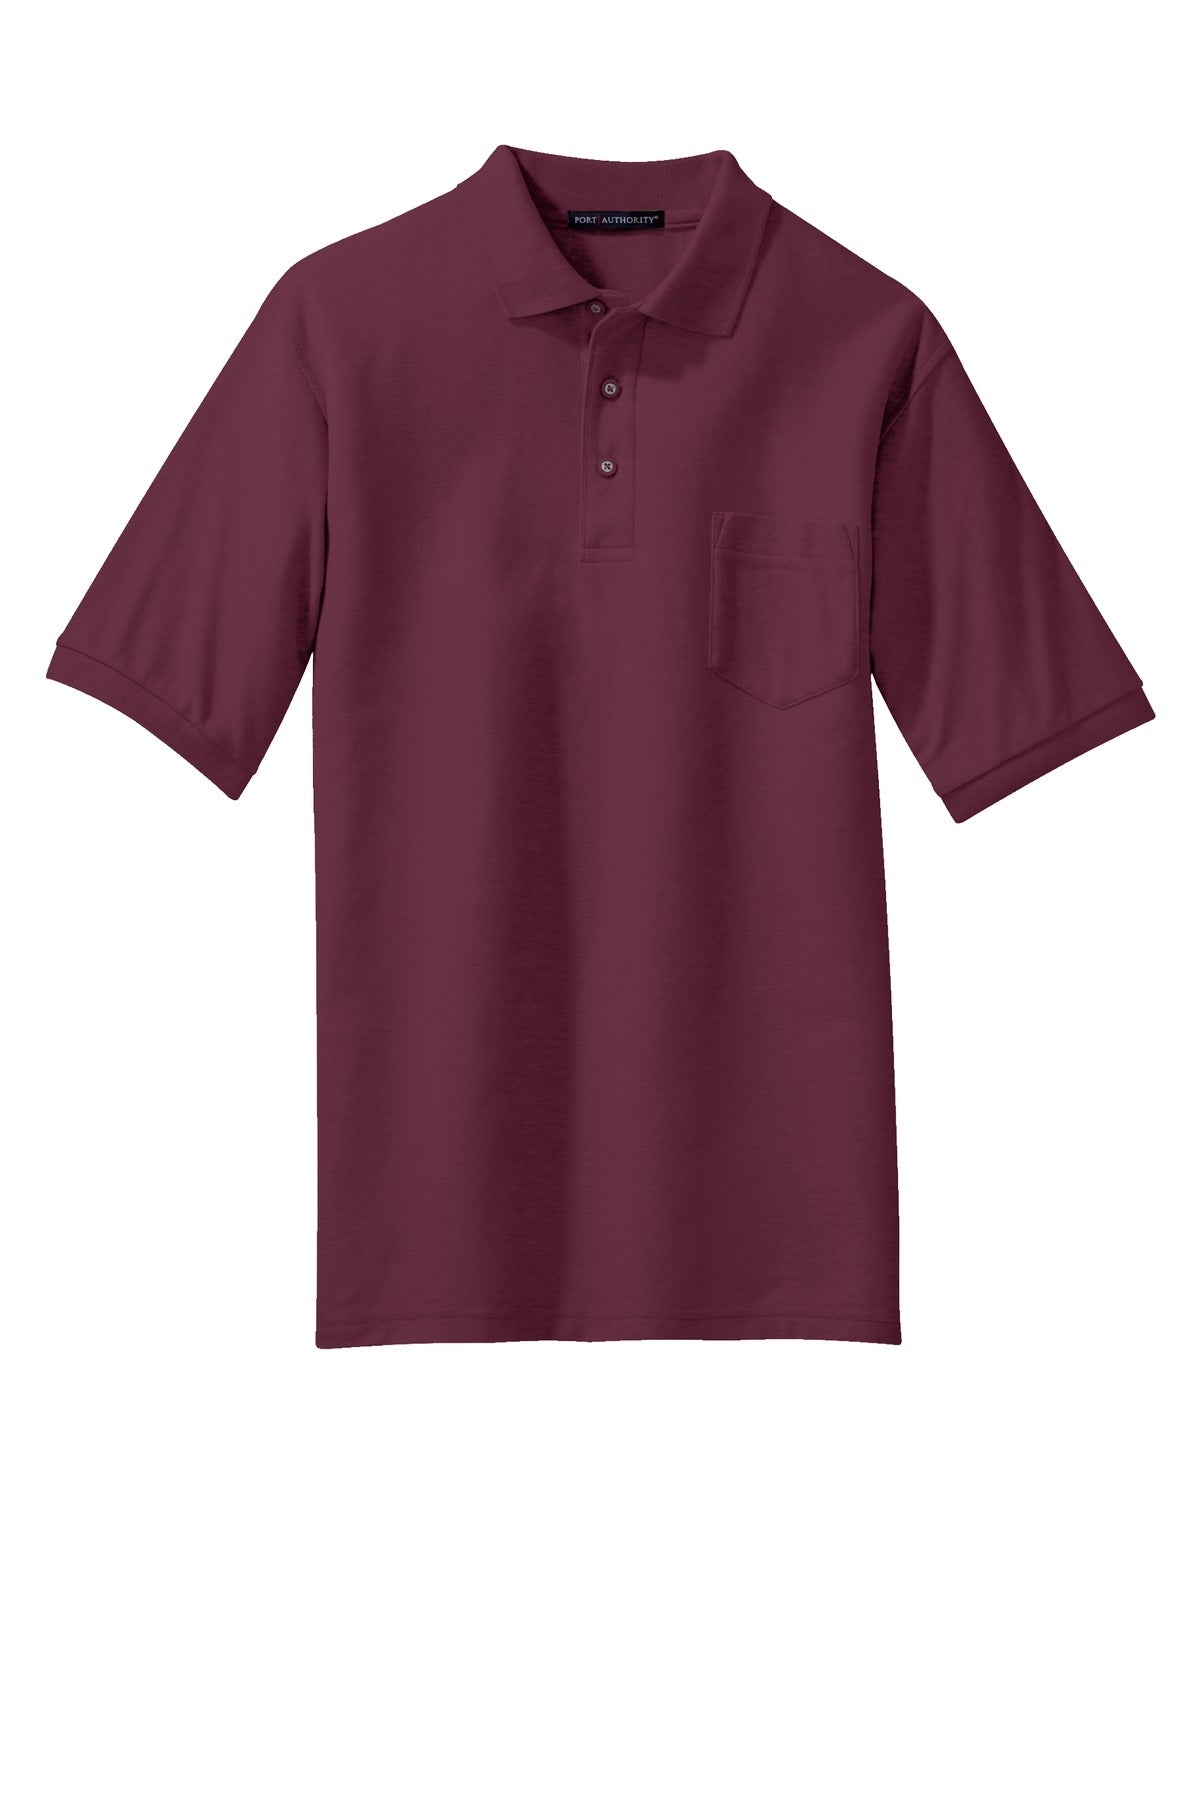 Port Authority Tall Silk Touch™ Polo with Pocket. TLK500P